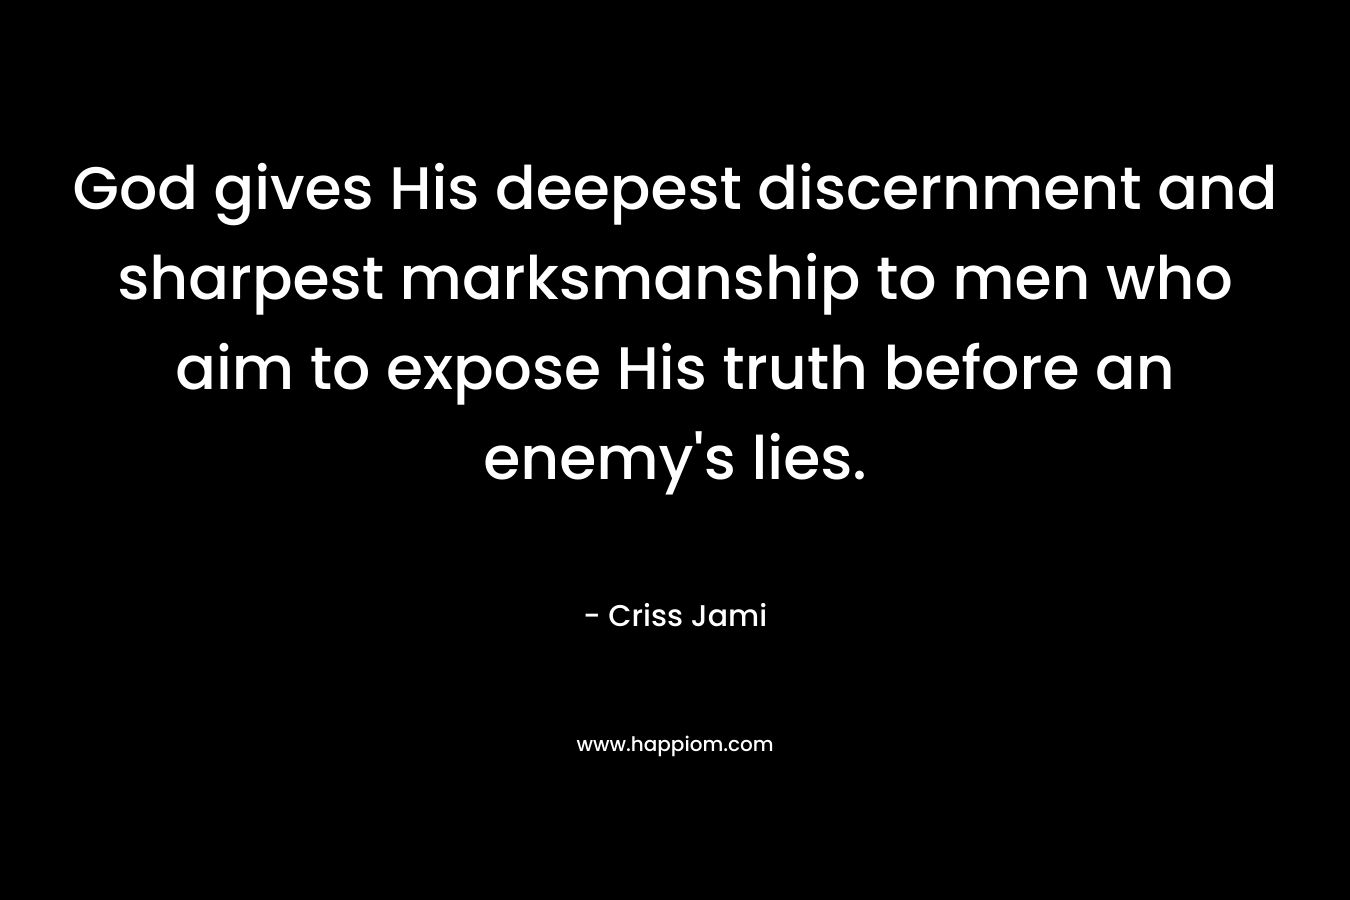 God gives His deepest discernment and sharpest marksmanship to men who aim to expose His truth before an enemy’s lies. – Criss Jami